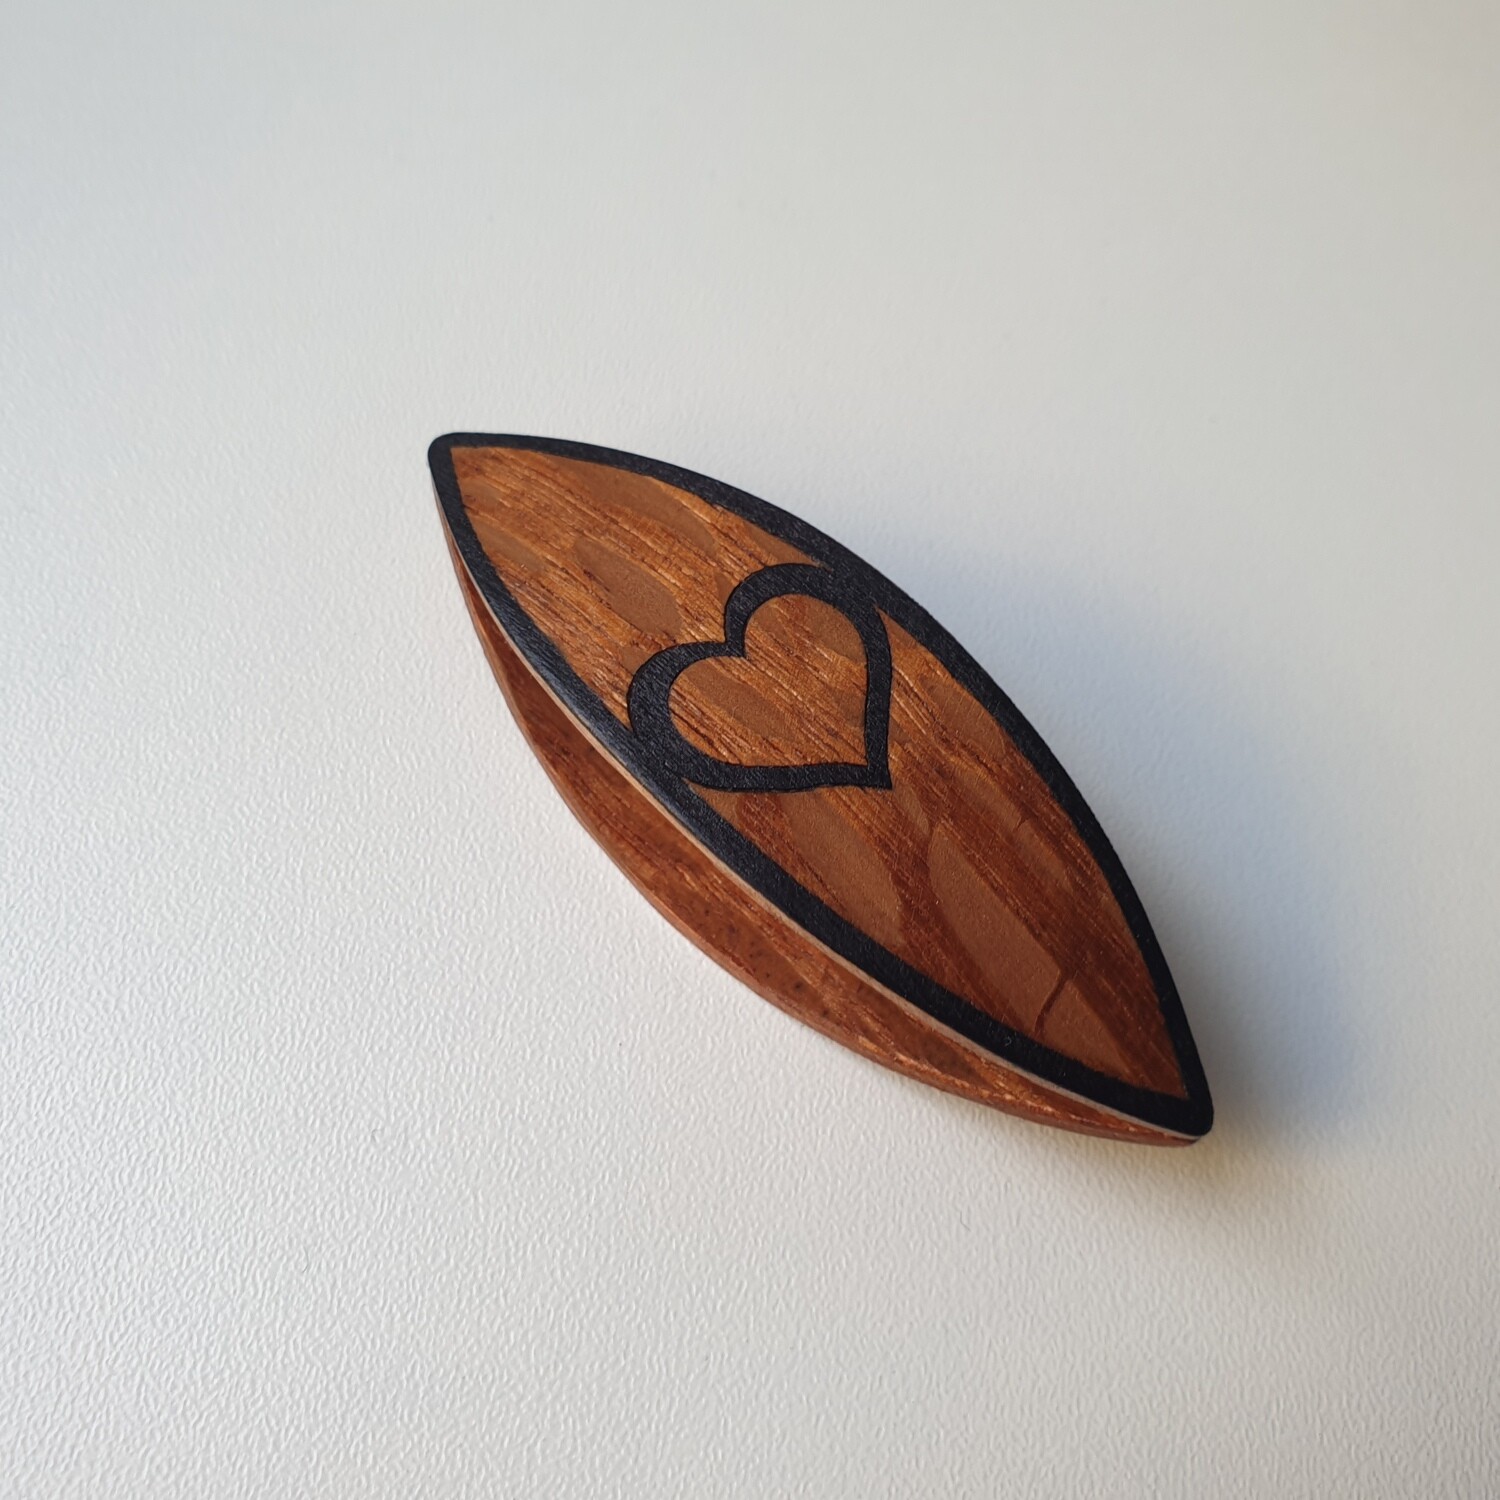 Tatting Shuttle Lacewood With Black Wood Inlay